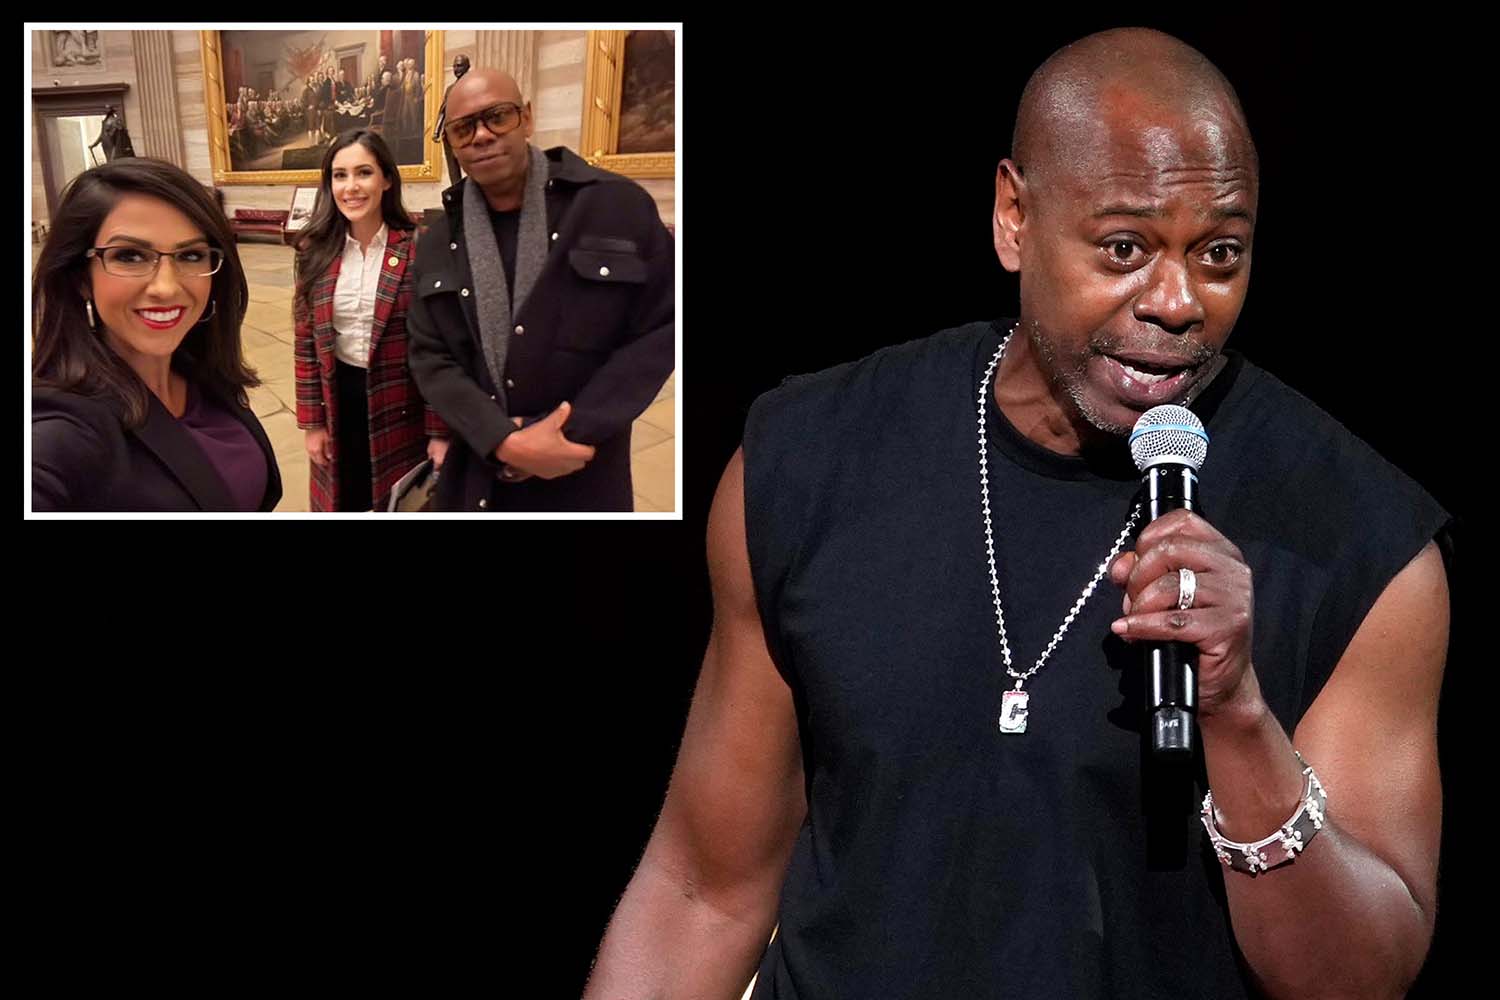 rep-lauren-boebert-takes-selfie-with-dave-chappelle-on-capitol-hill